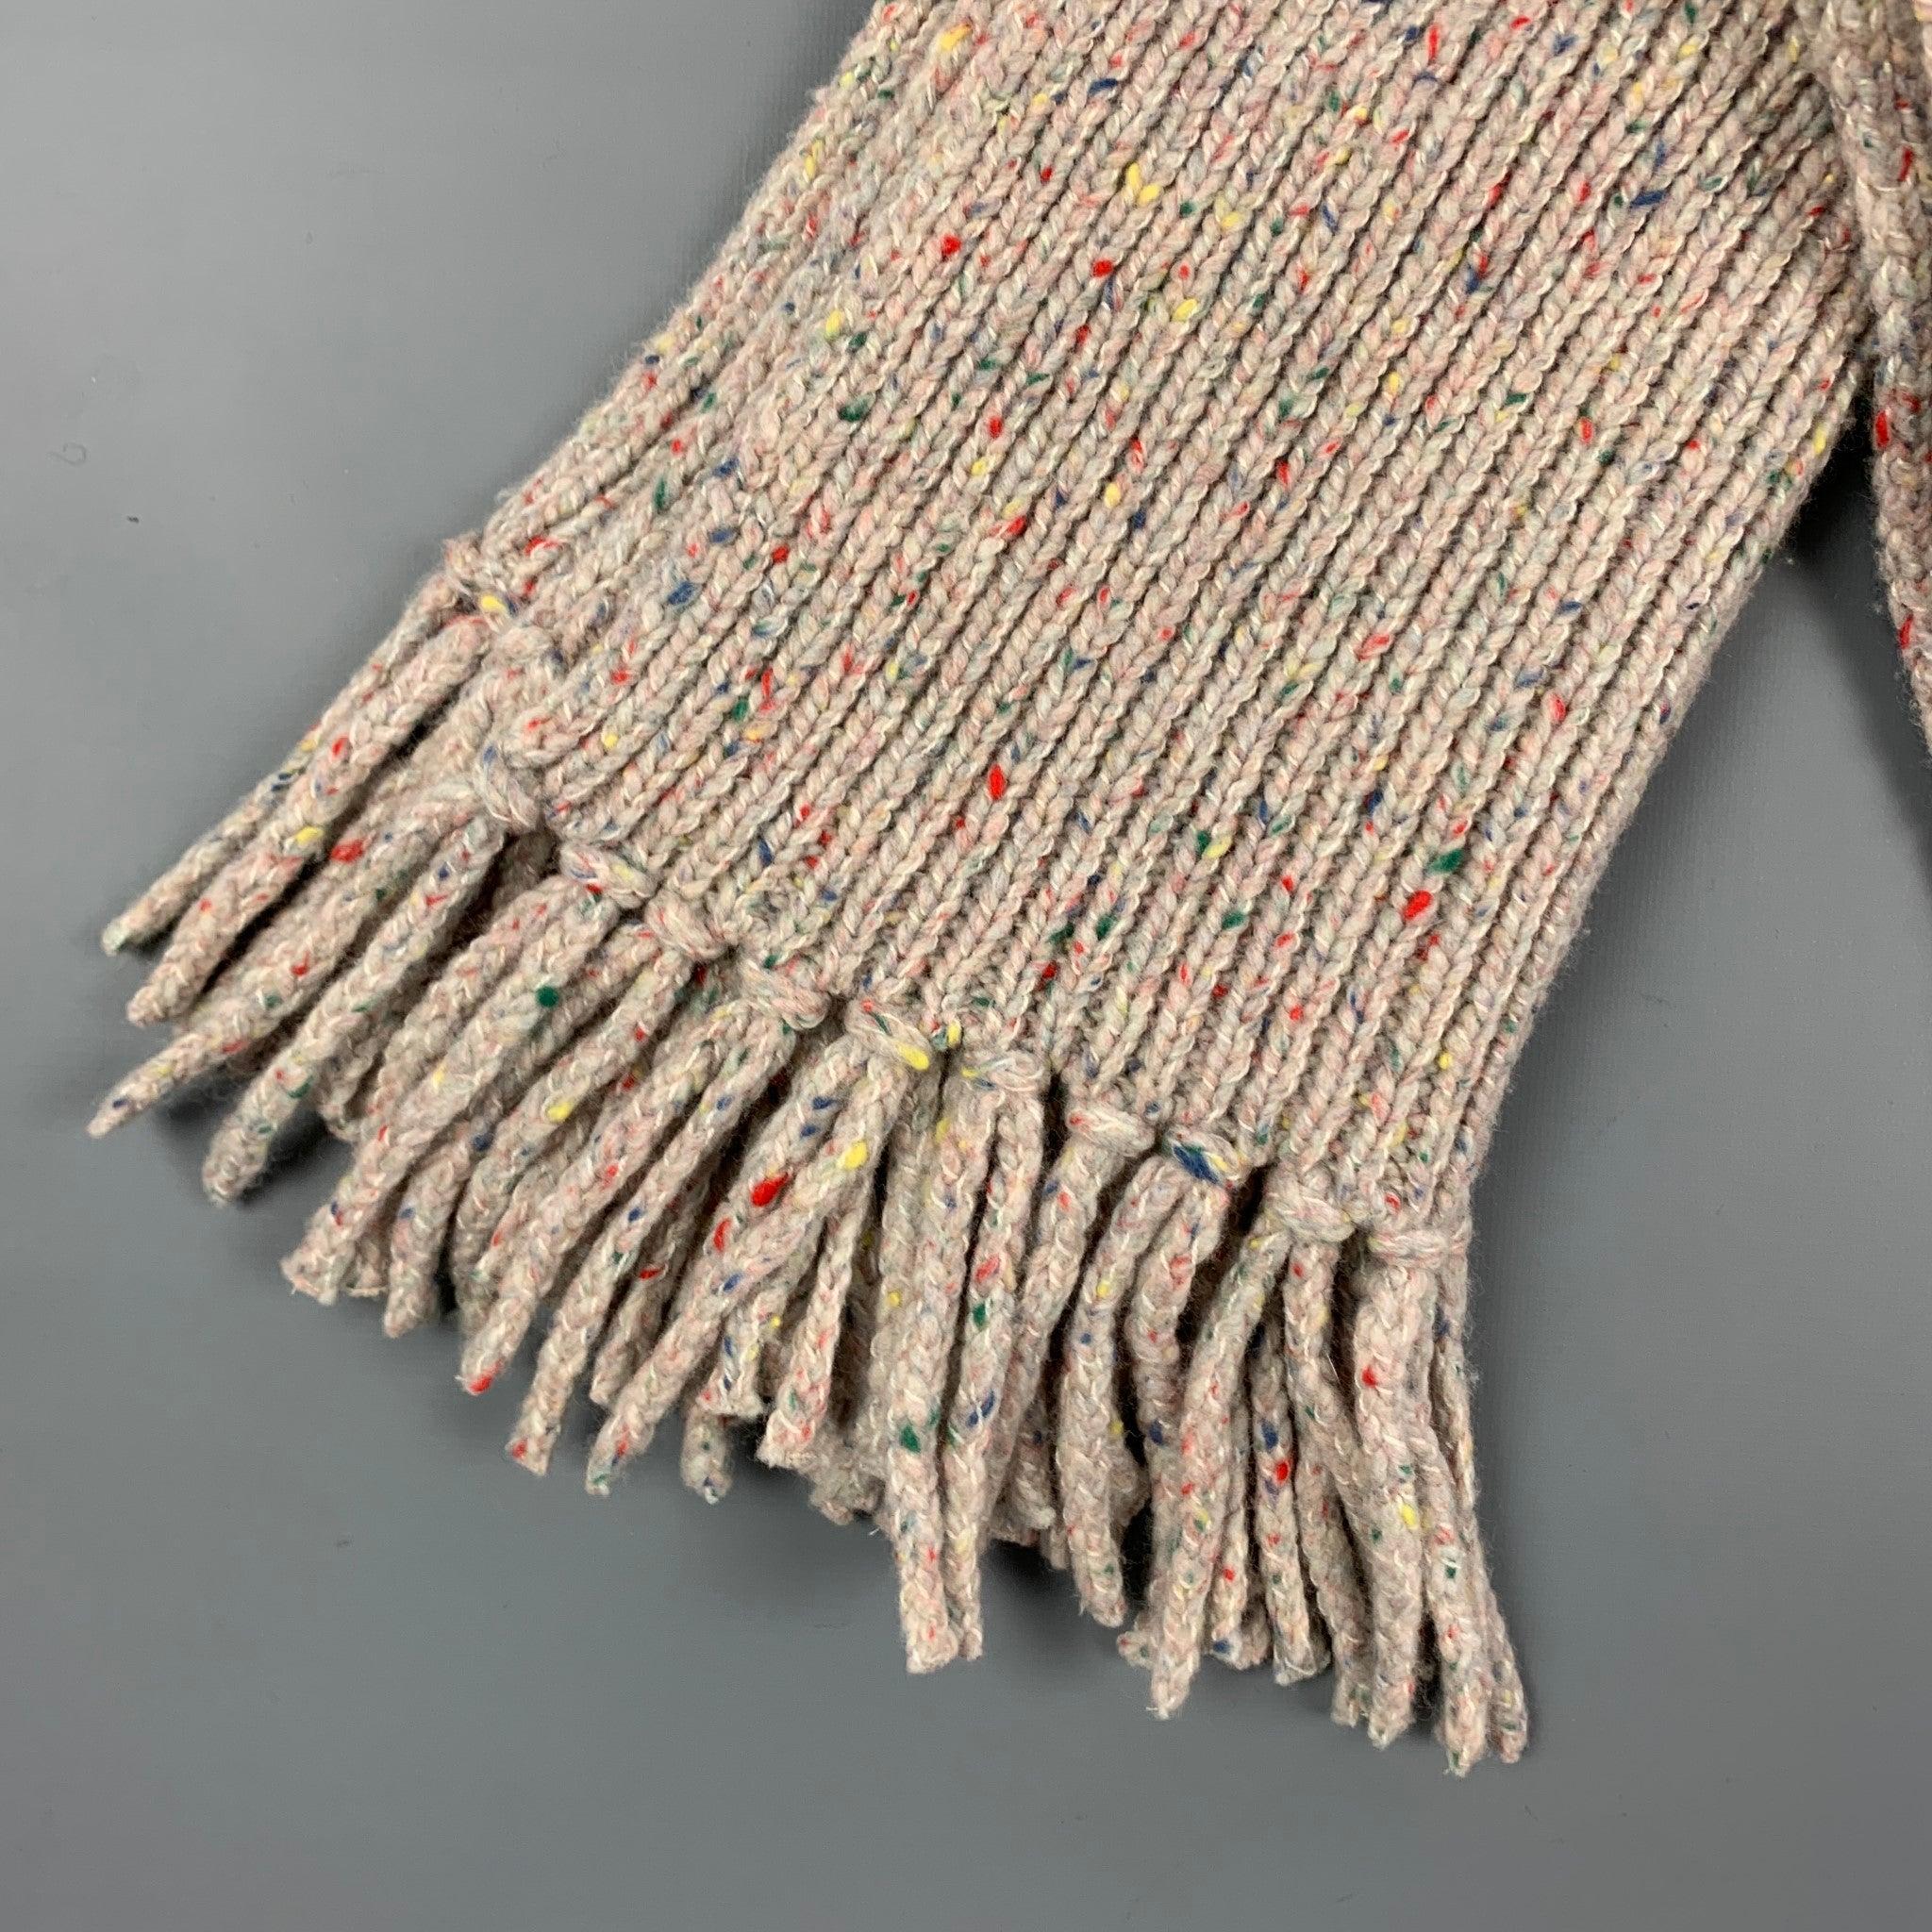 LOUIS VUITTON scarf comes in a oatmeal knitted material featuring a fringe trim. Logo tag missing.
Very Good Pre-Owned Condition. As-Is.  

Measurements: 
  74 inches  x 17 inches 
  
  
 
Reference: 120135
Category: Scarves
More Details
    
Brand: